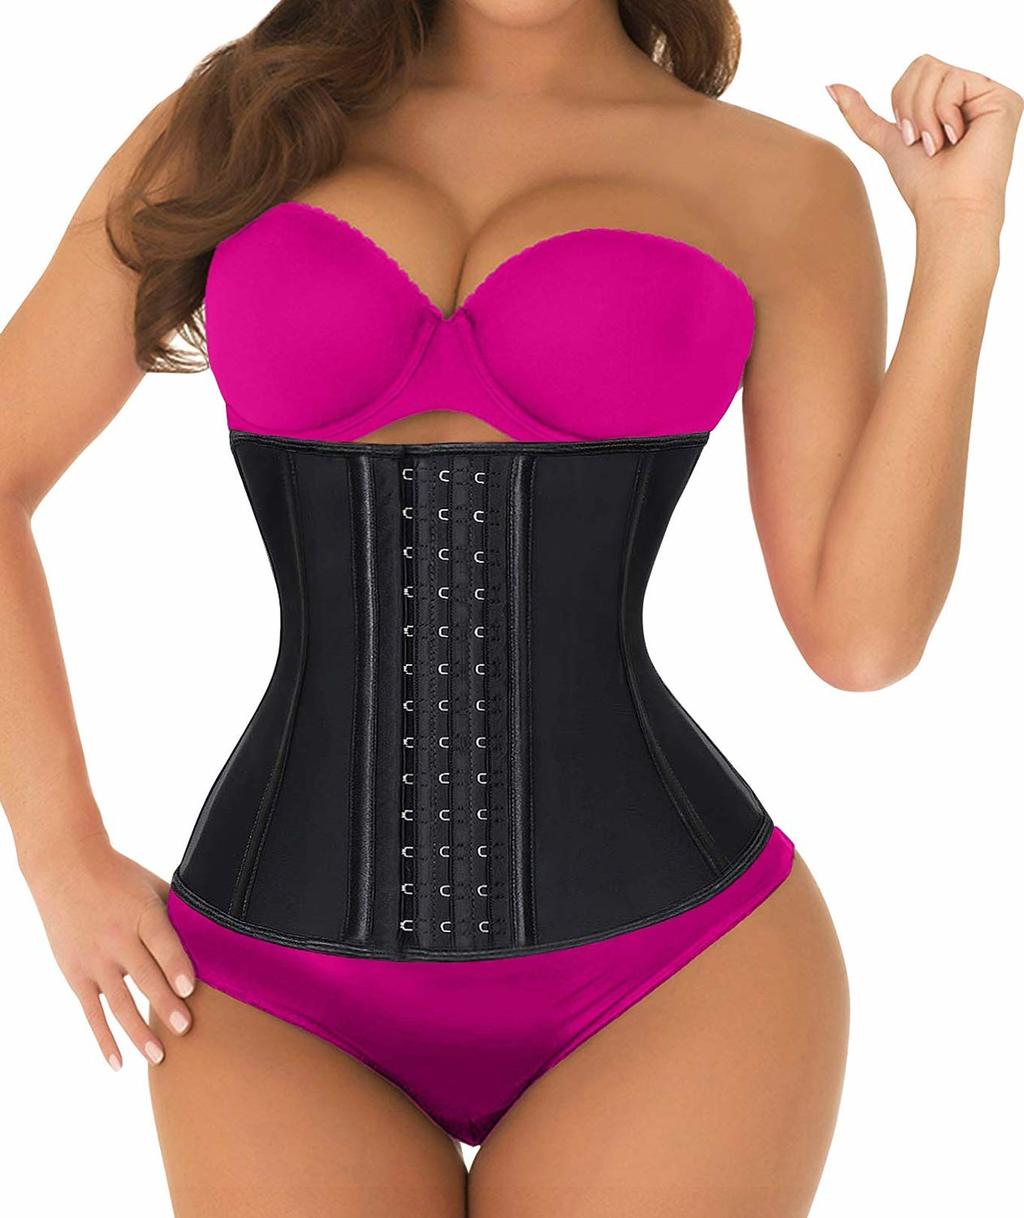 types of waist trainers